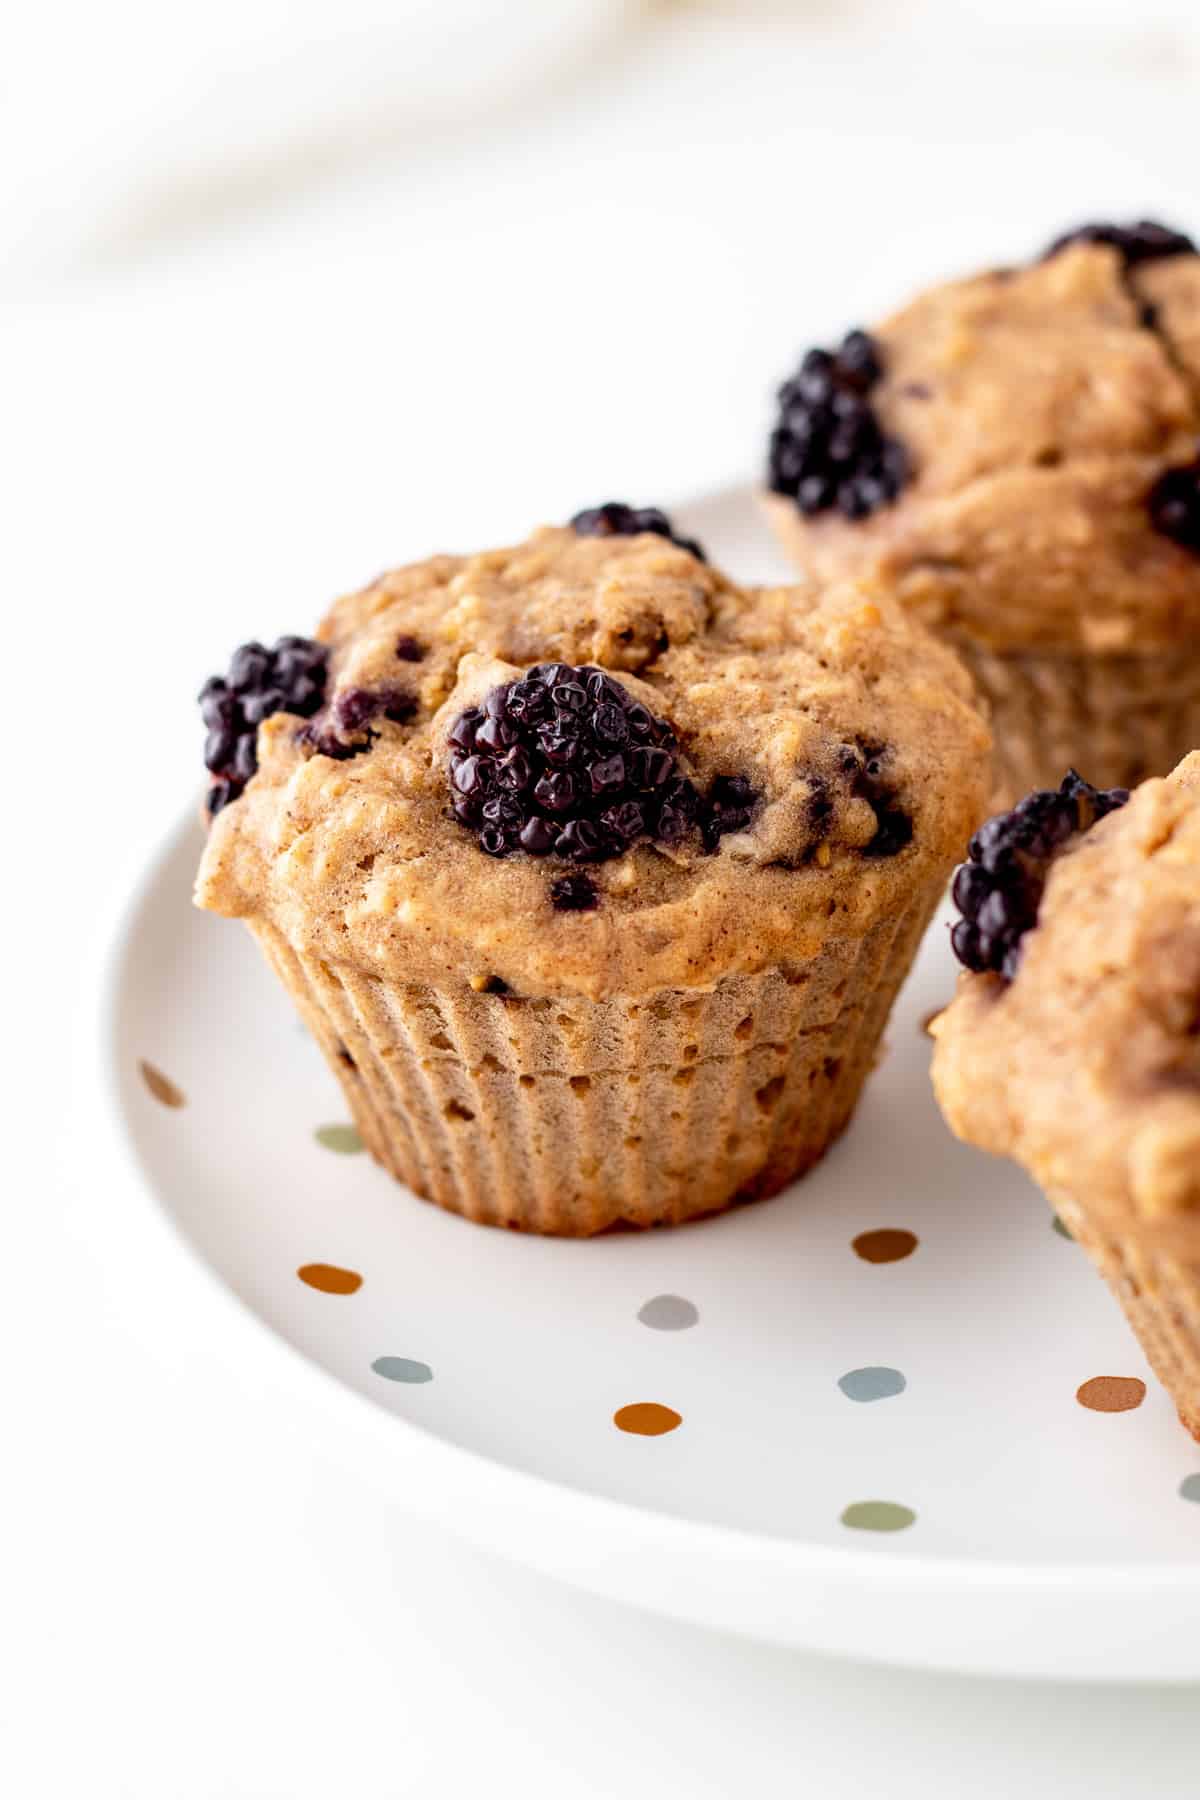 A close-up of a blackberry oat muffin on a plate.